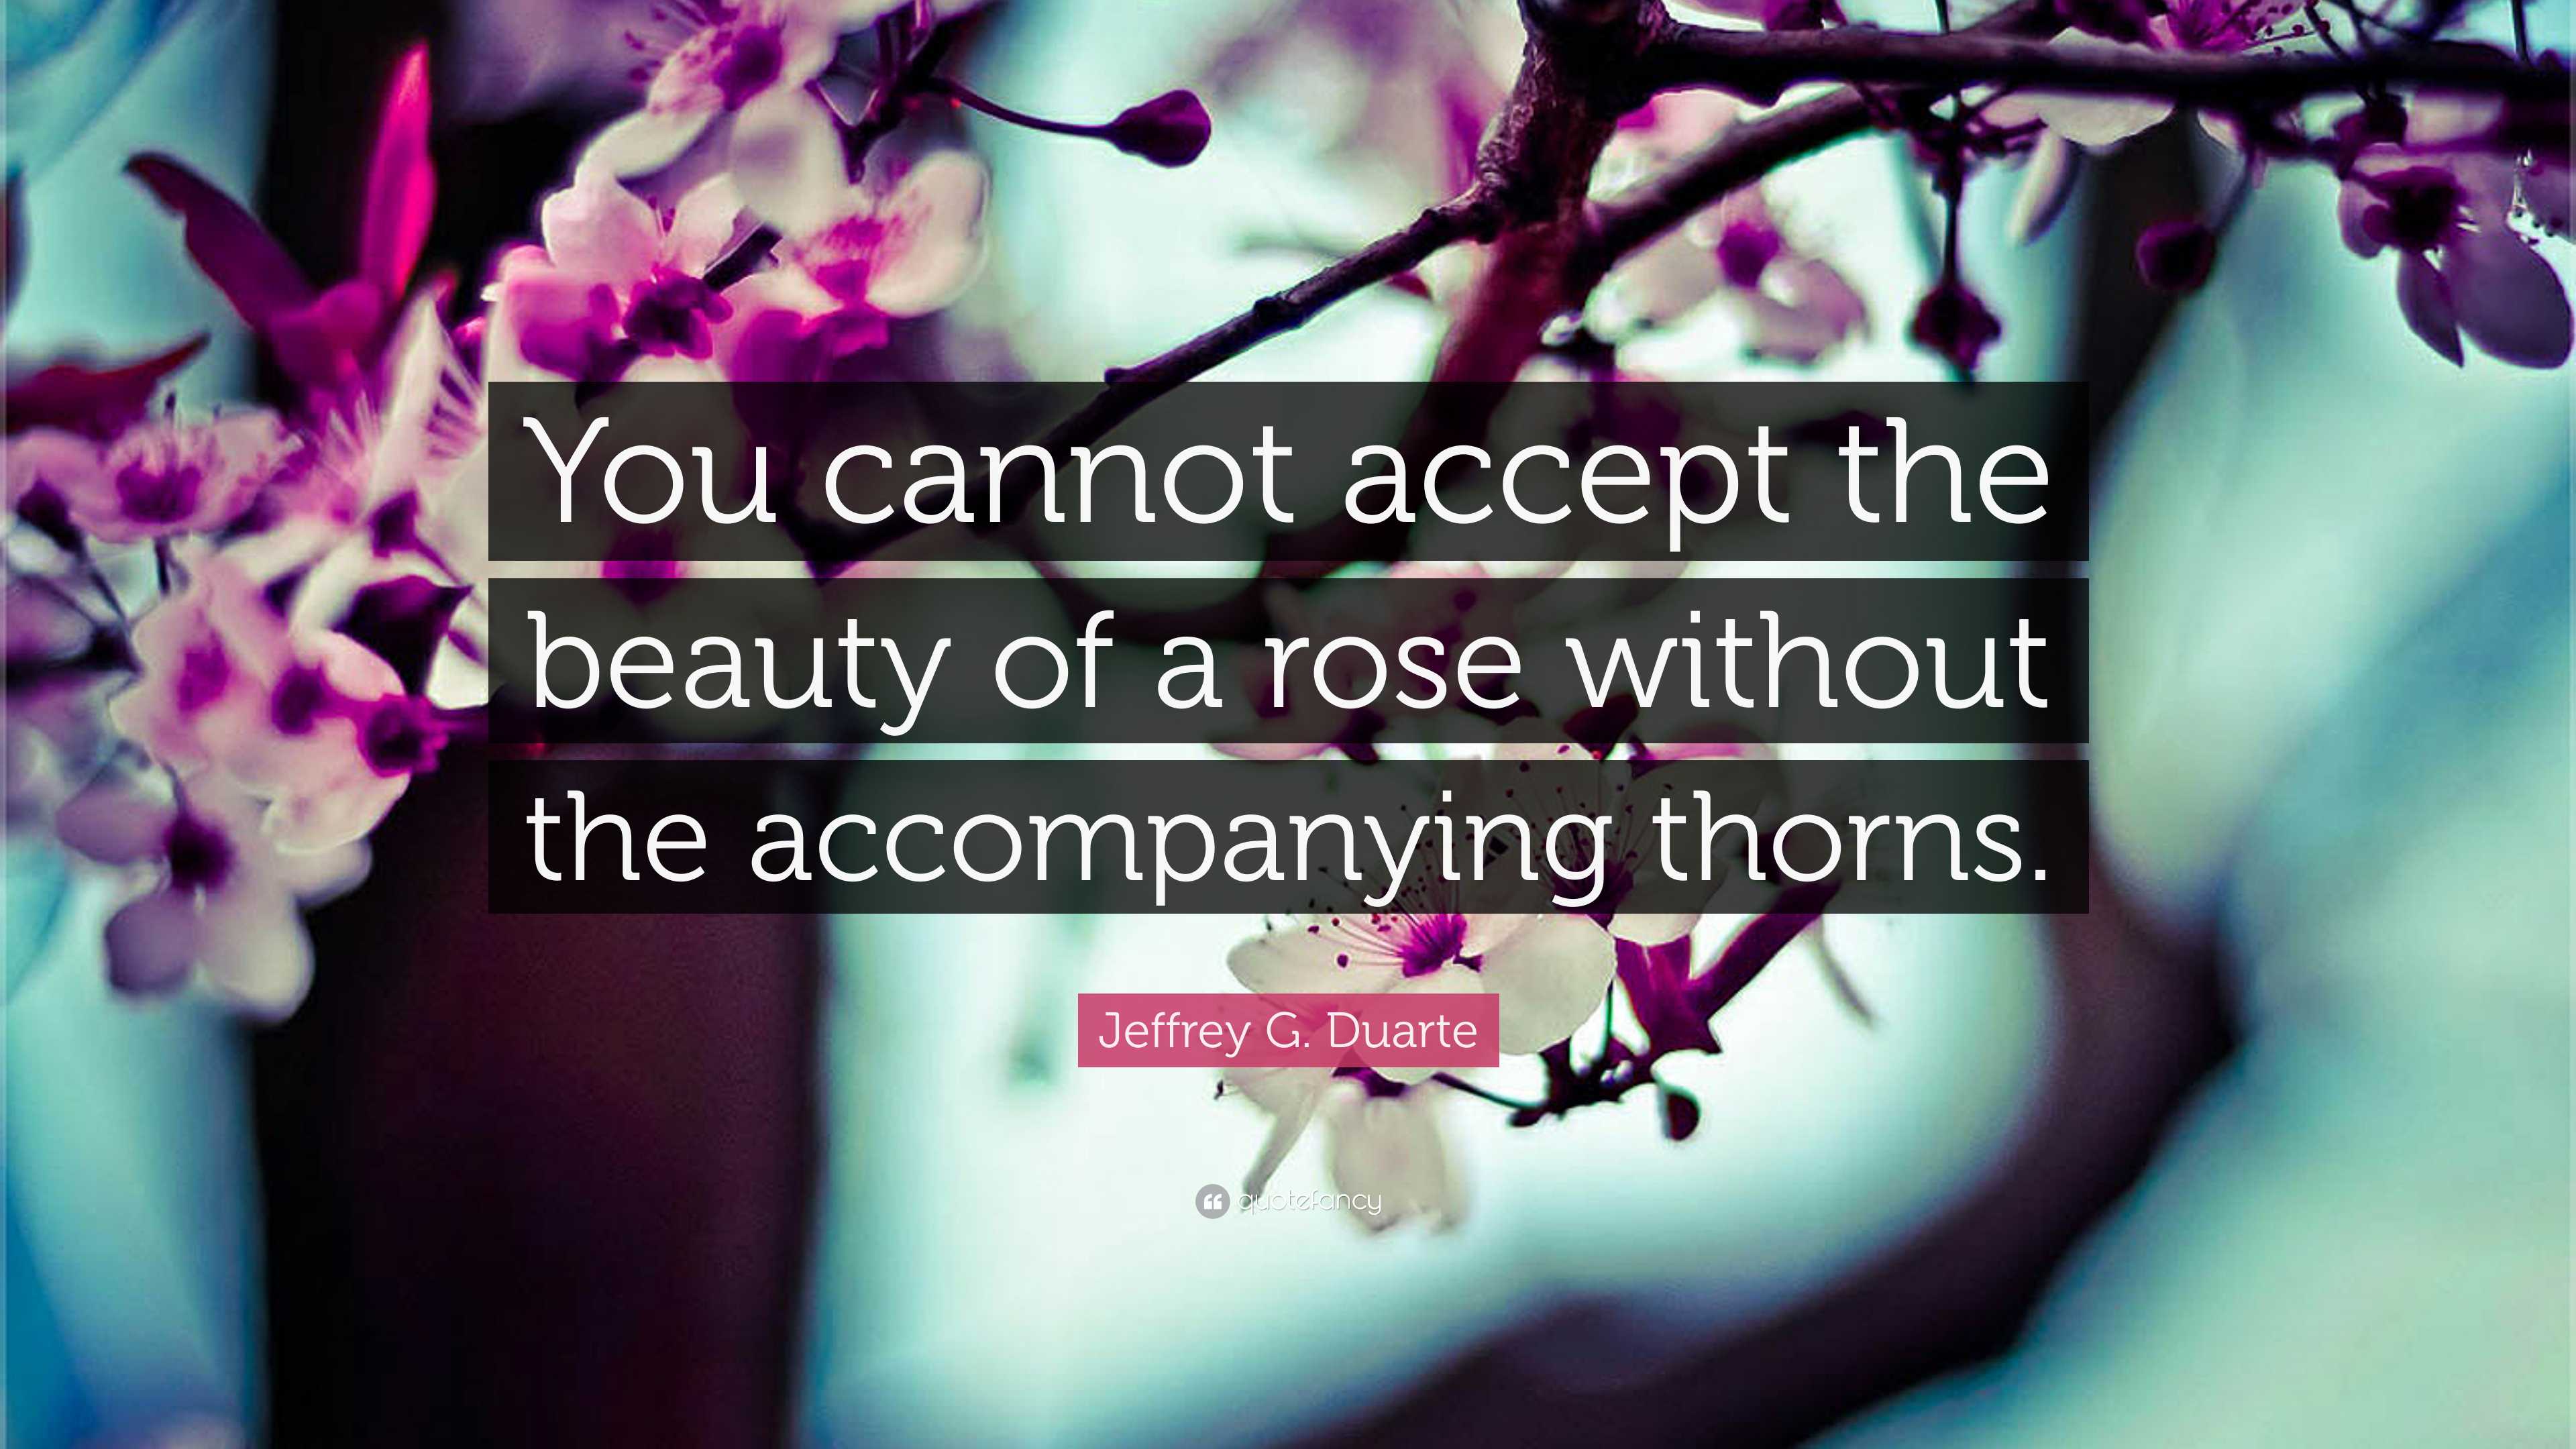 Jeffrey G. Duarte Quote: “You cannot accept the beauty of a rose ...